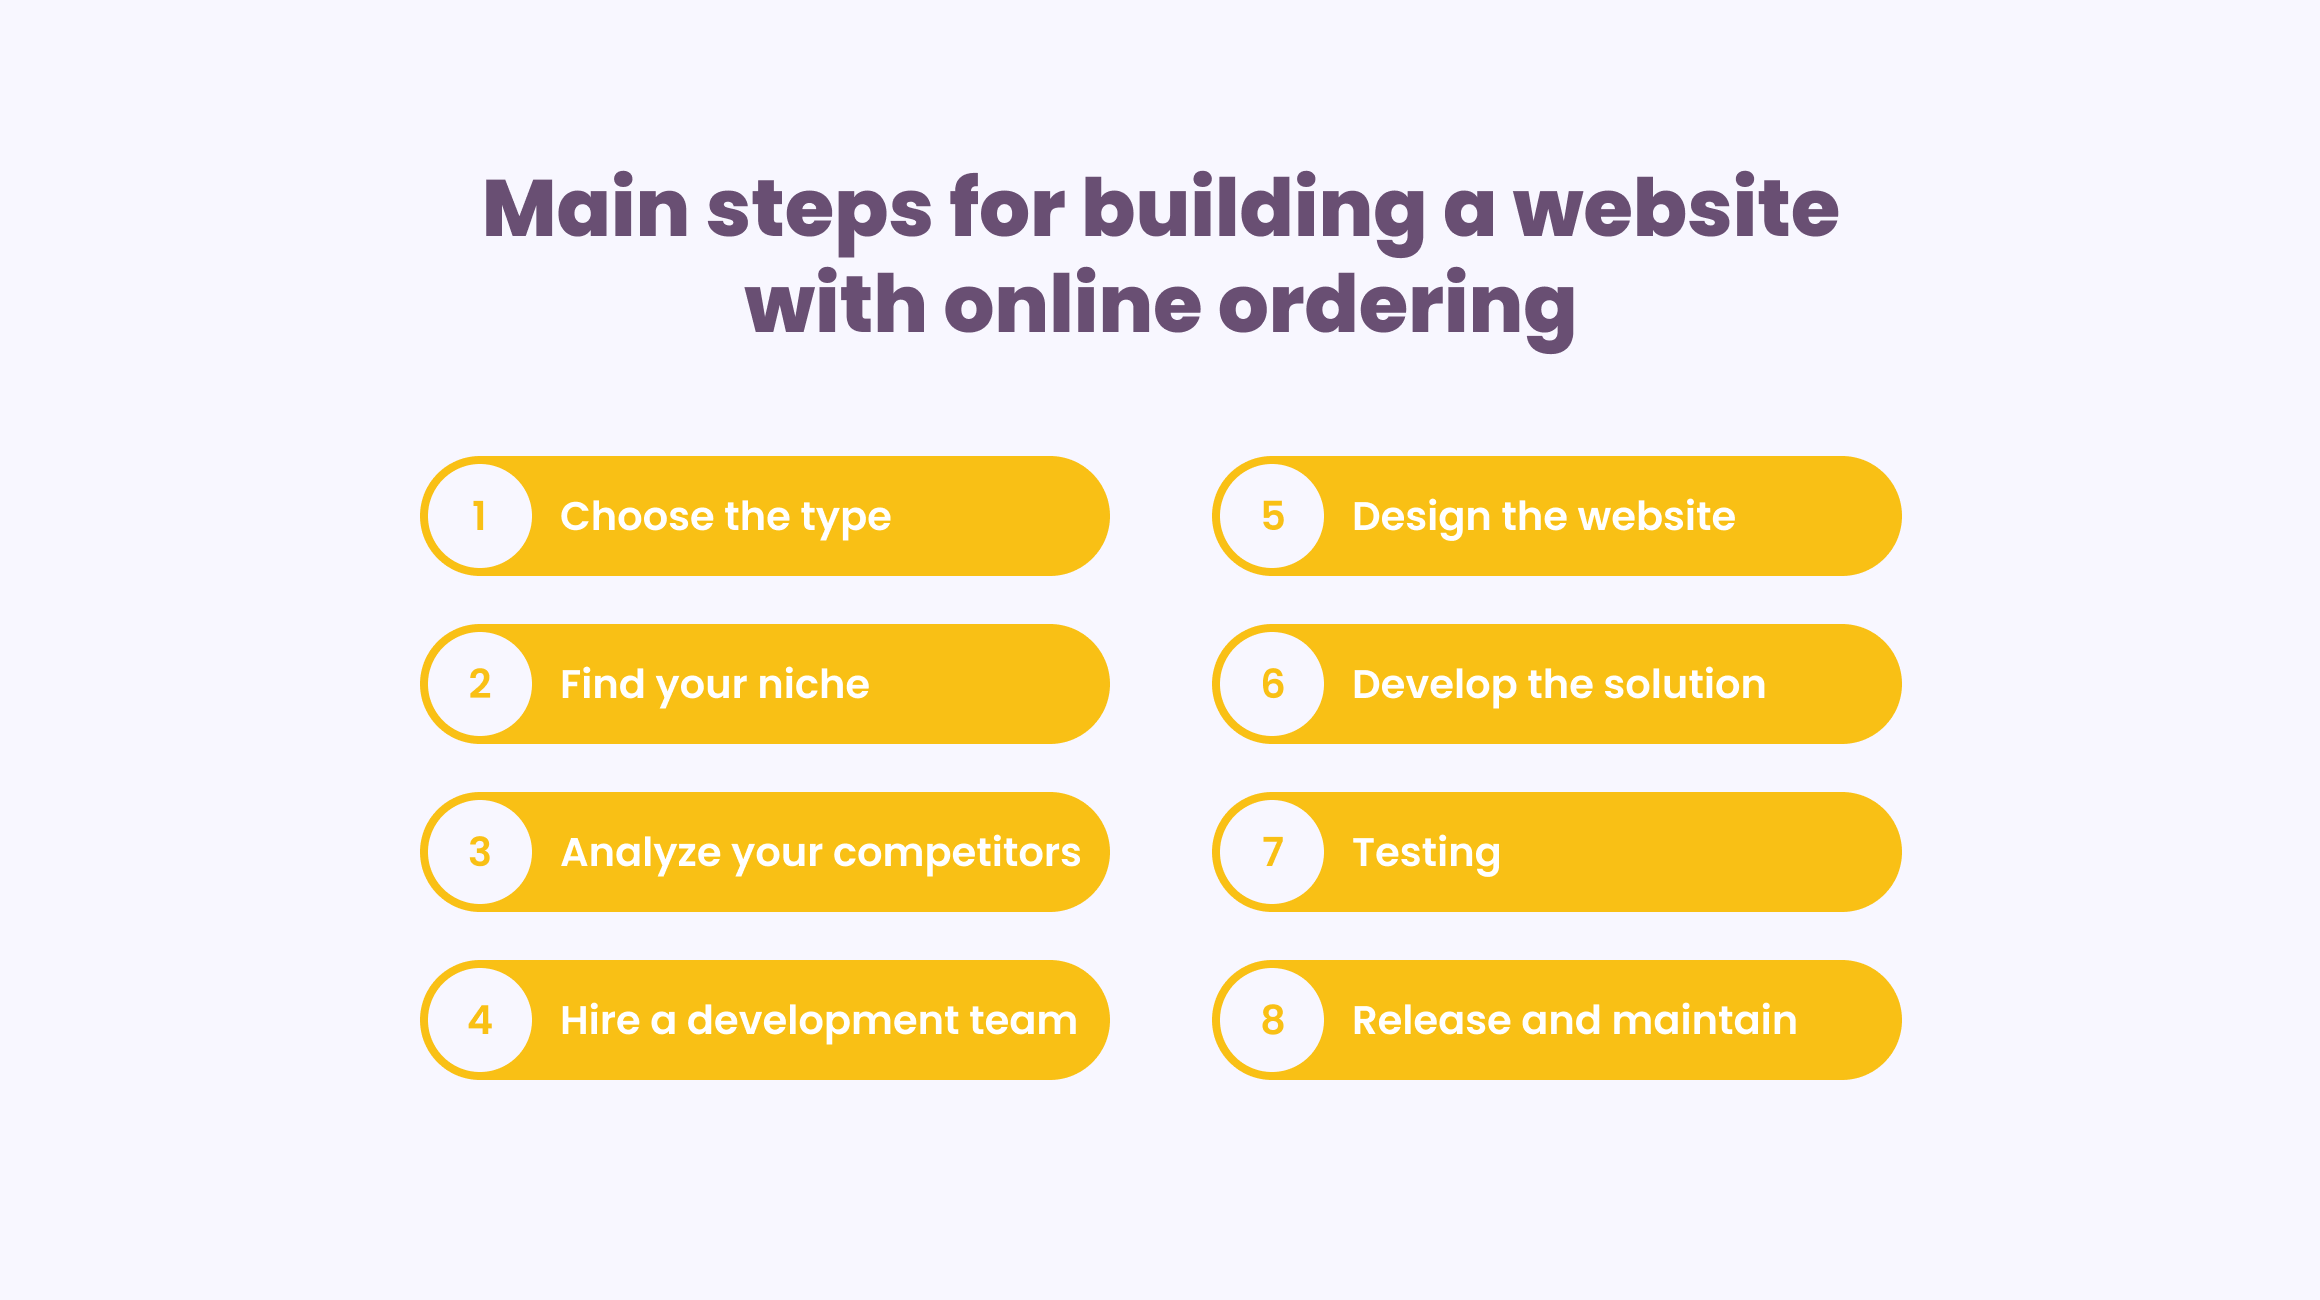 How to make a food ordering website